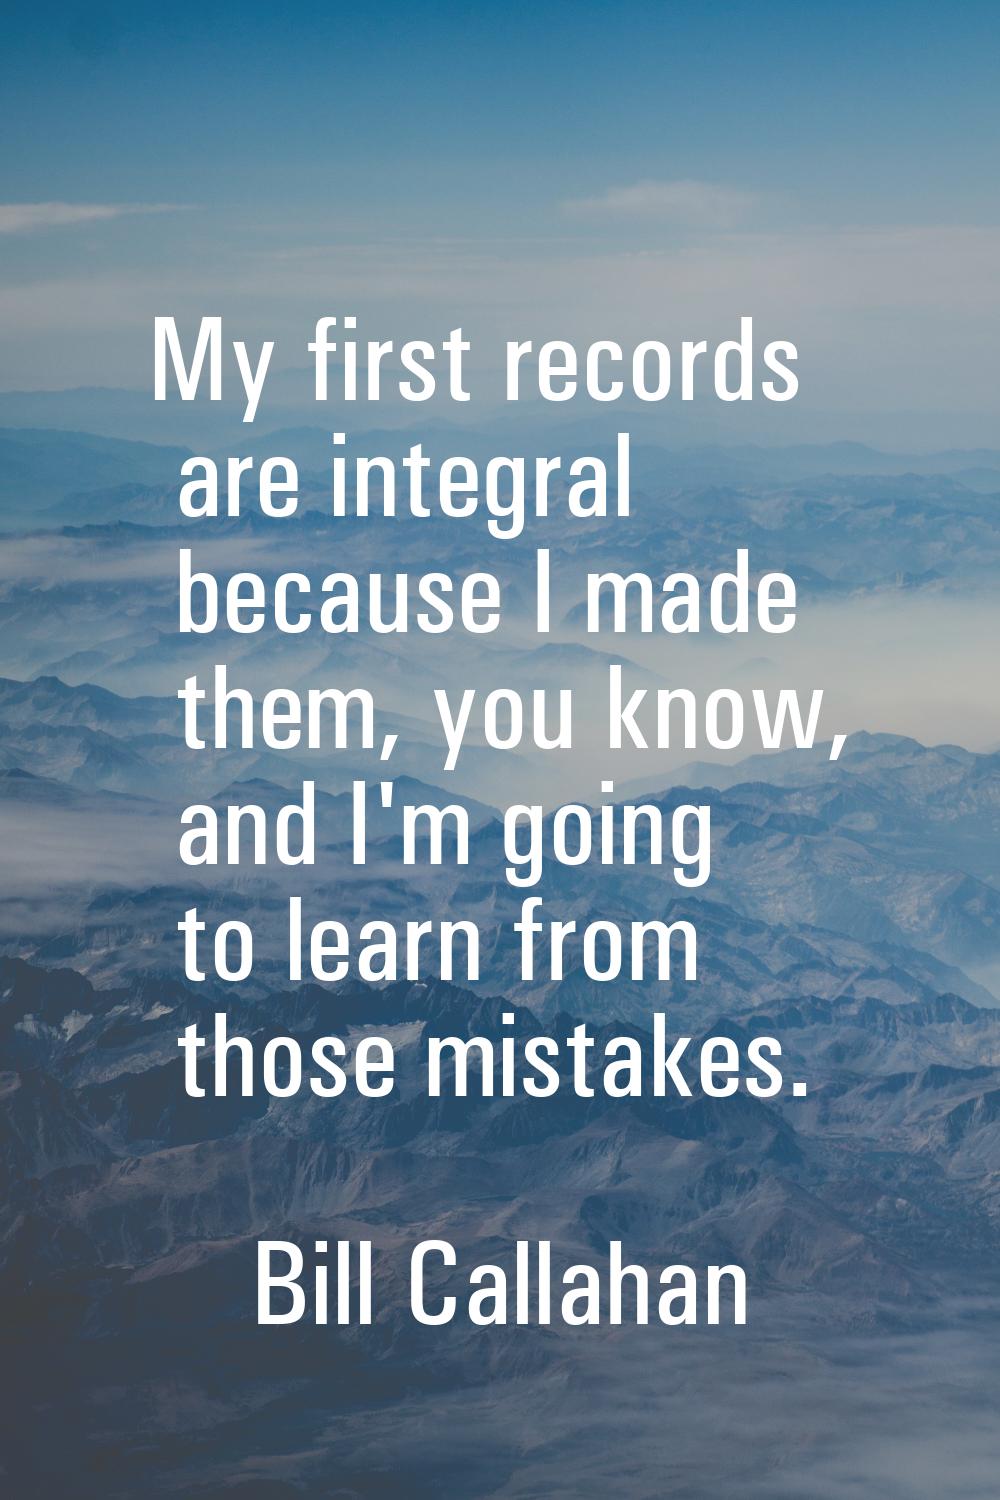 My first records are integral because I made them, you know, and I'm going to learn from those mist